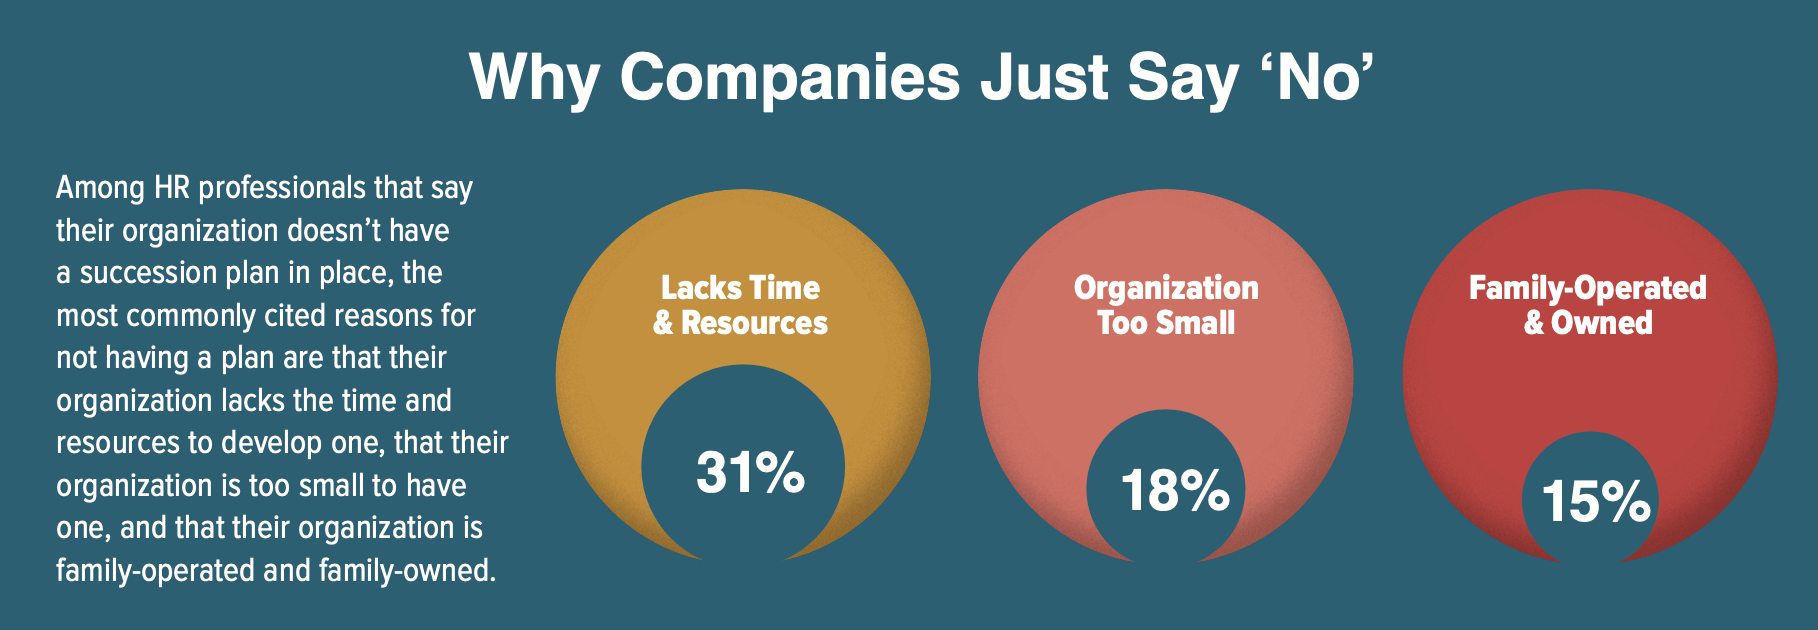 “Why companies just say no” infographic